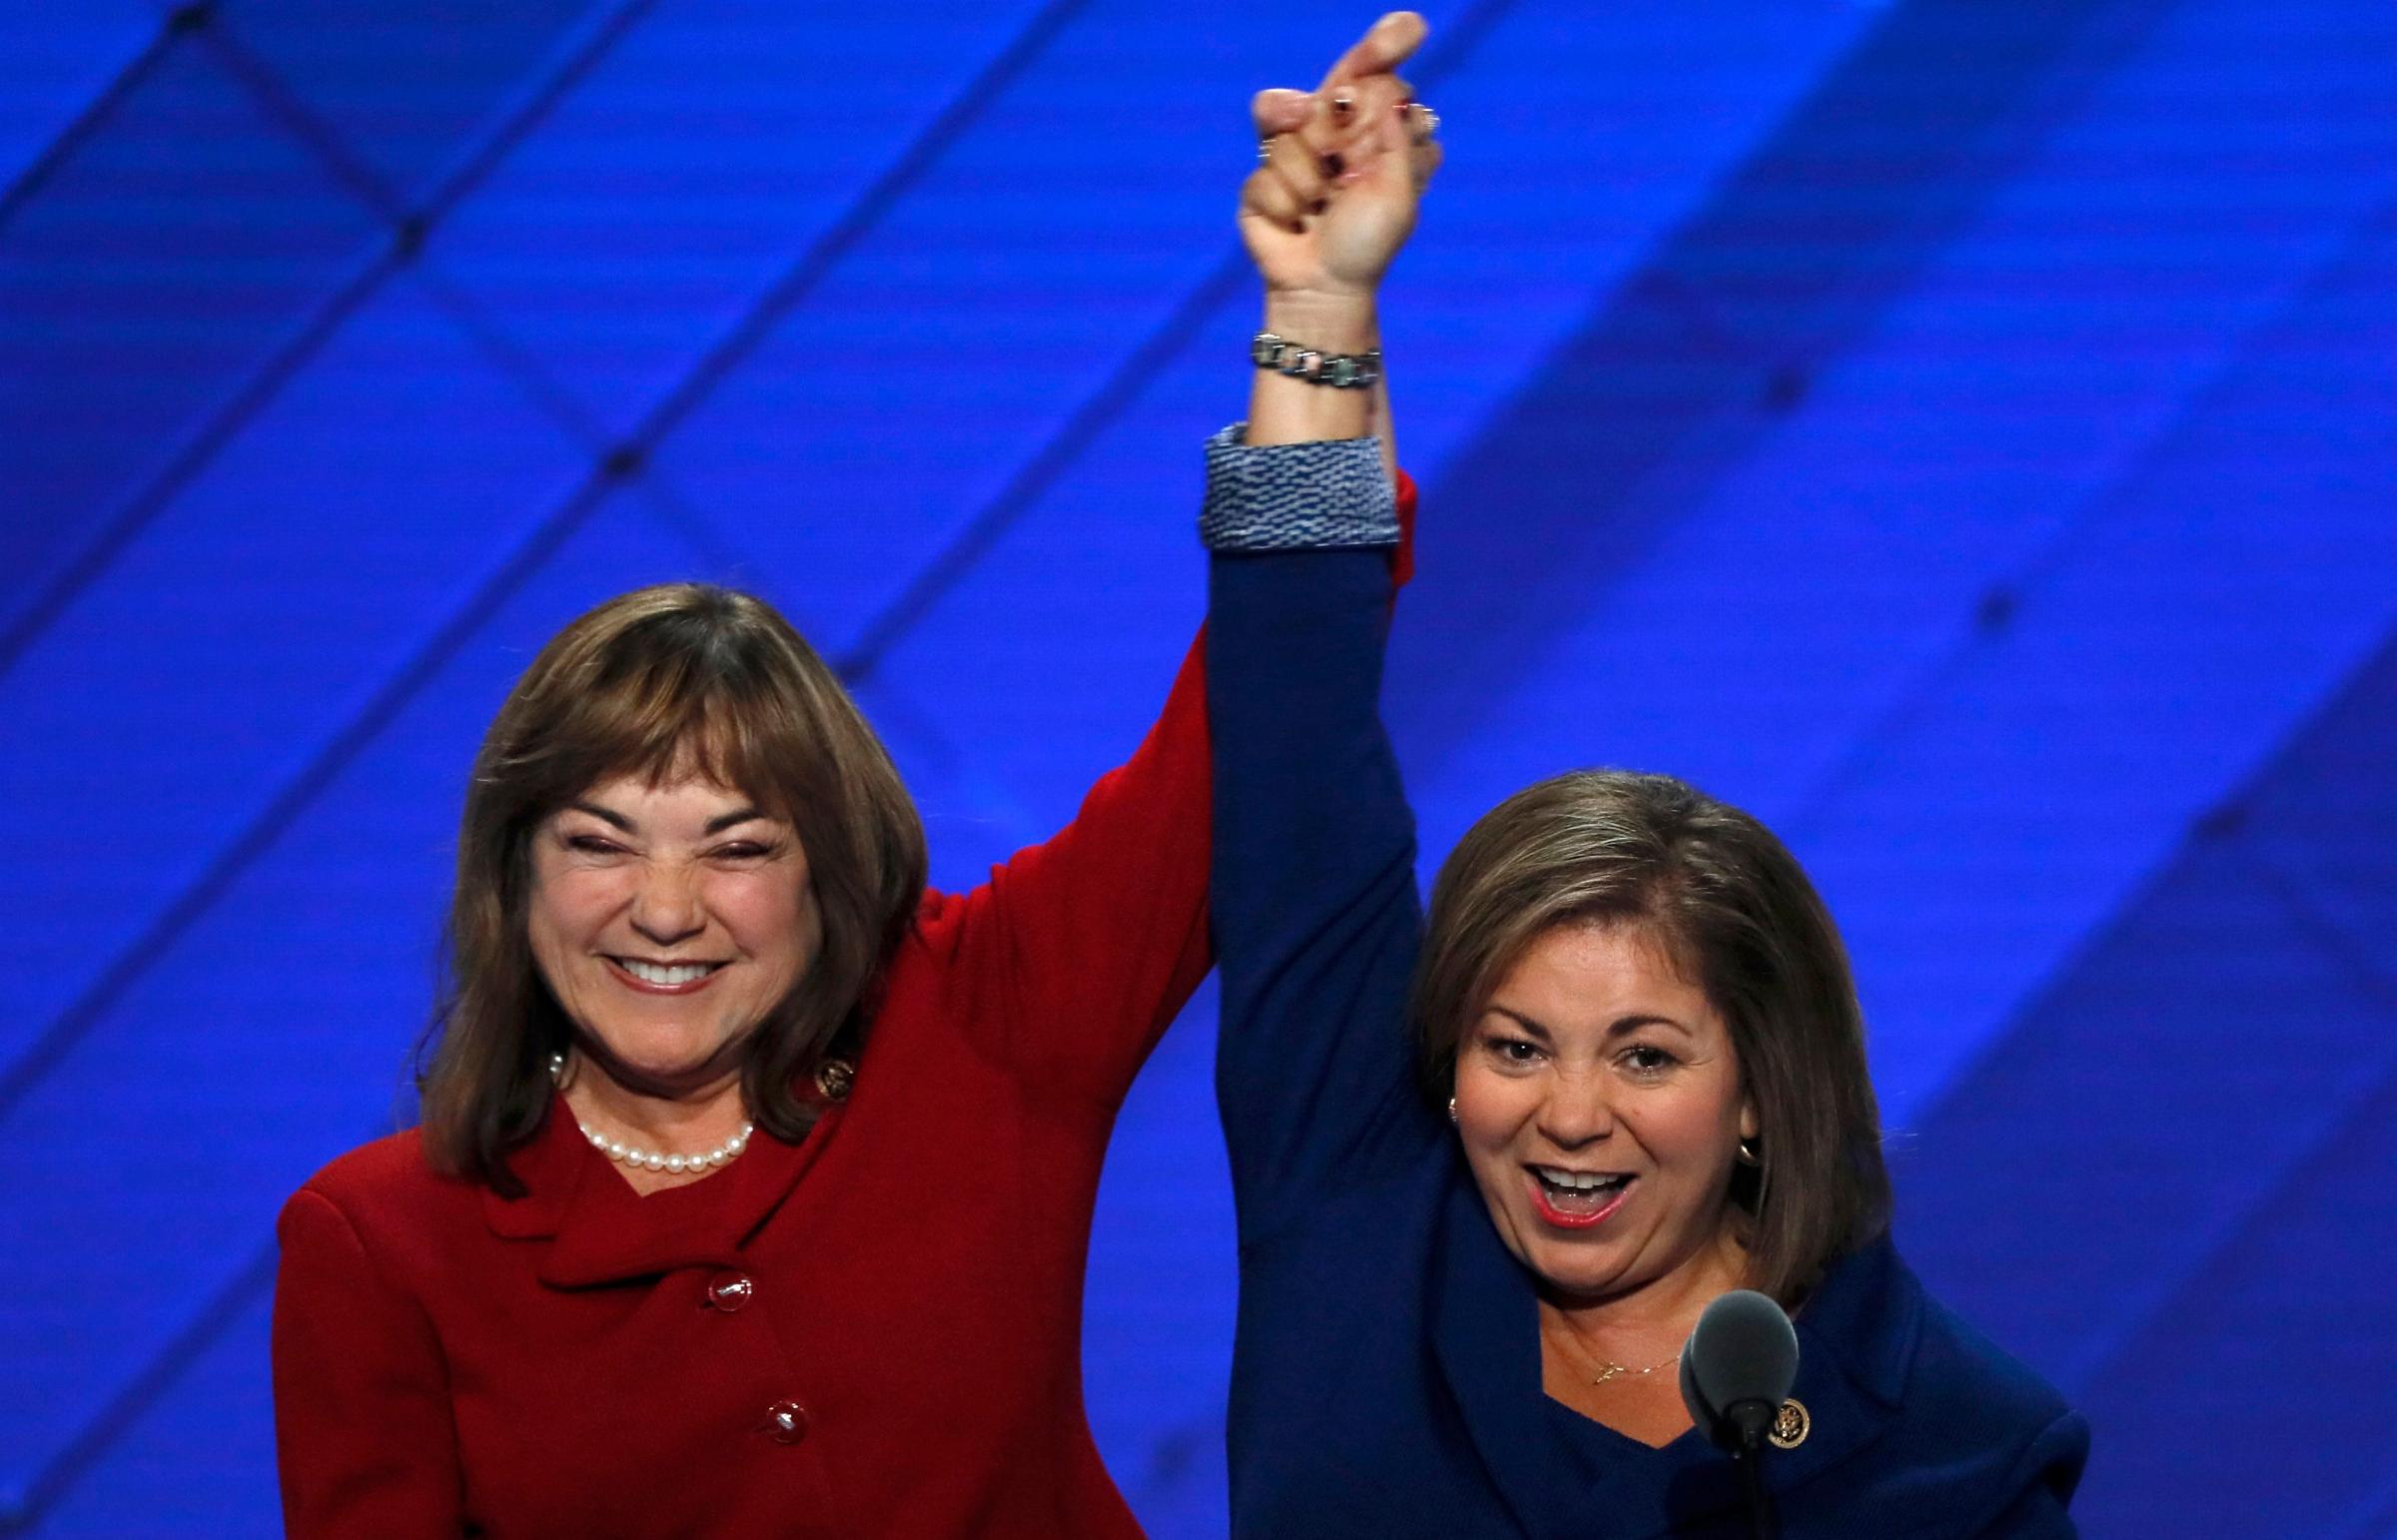 U.S. Rep. Linda Sanchez (D-CA) (R) and her sister and fellow Rep. Loretta join hands onstage at the Democratic National Convention in Philadelphia on July 25, 2016.